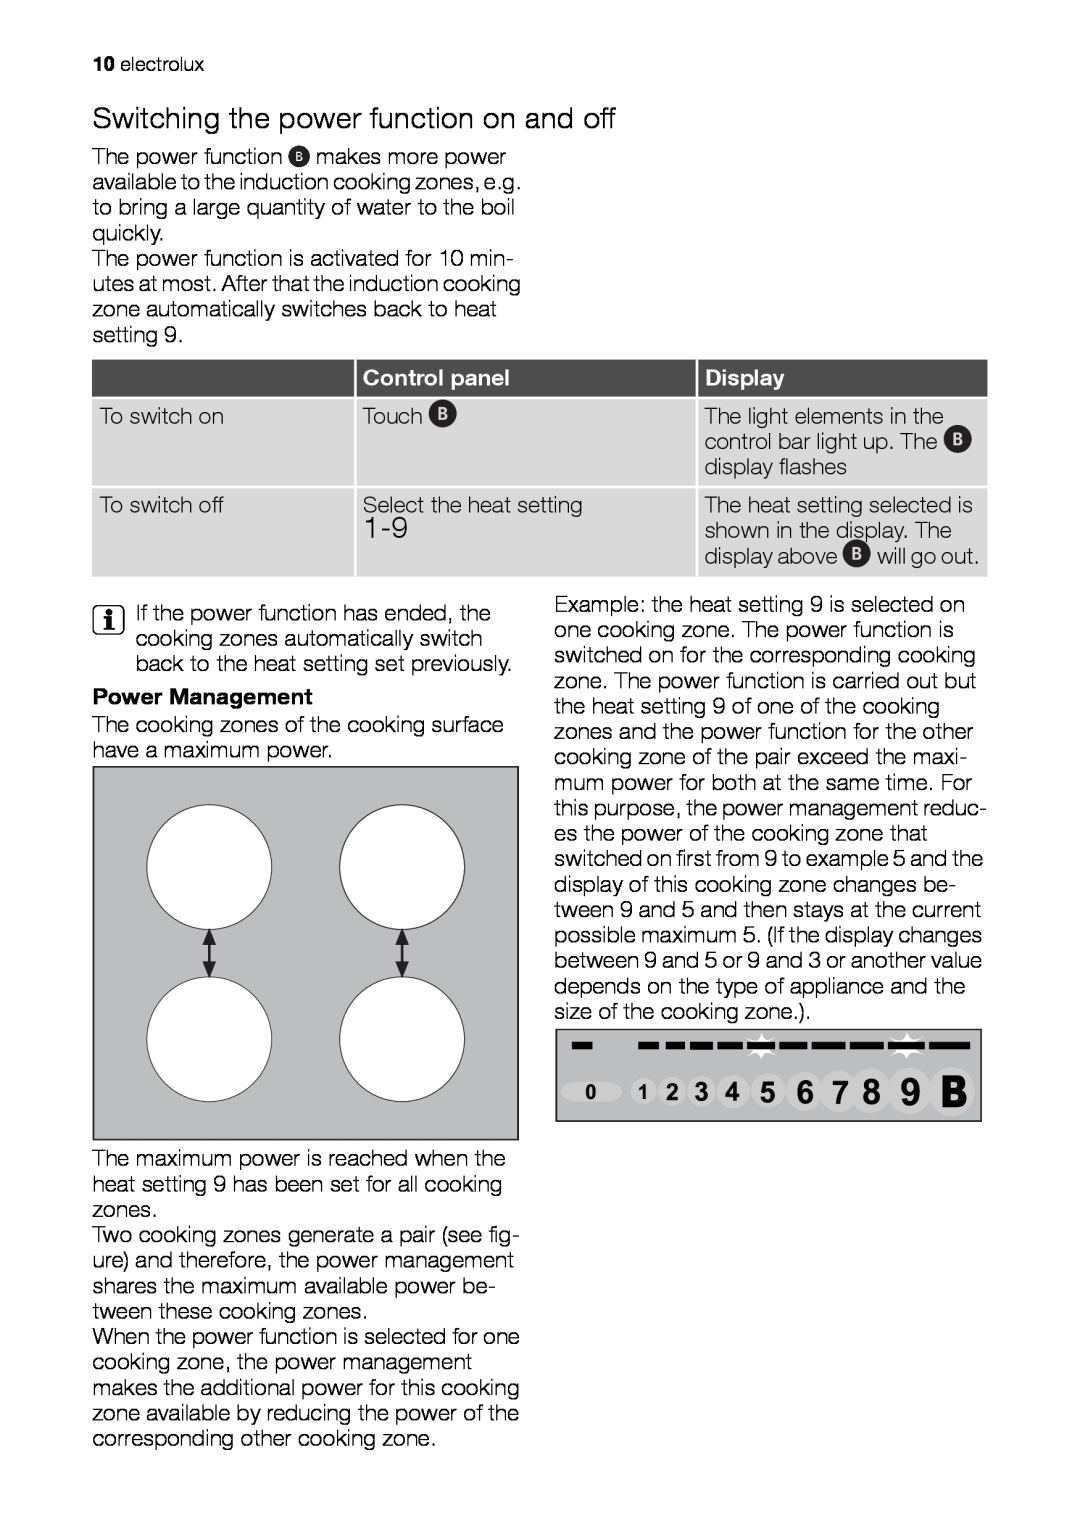 Electrolux EHD 60150 IAU user manual Switching the power function on and off, Power Management 